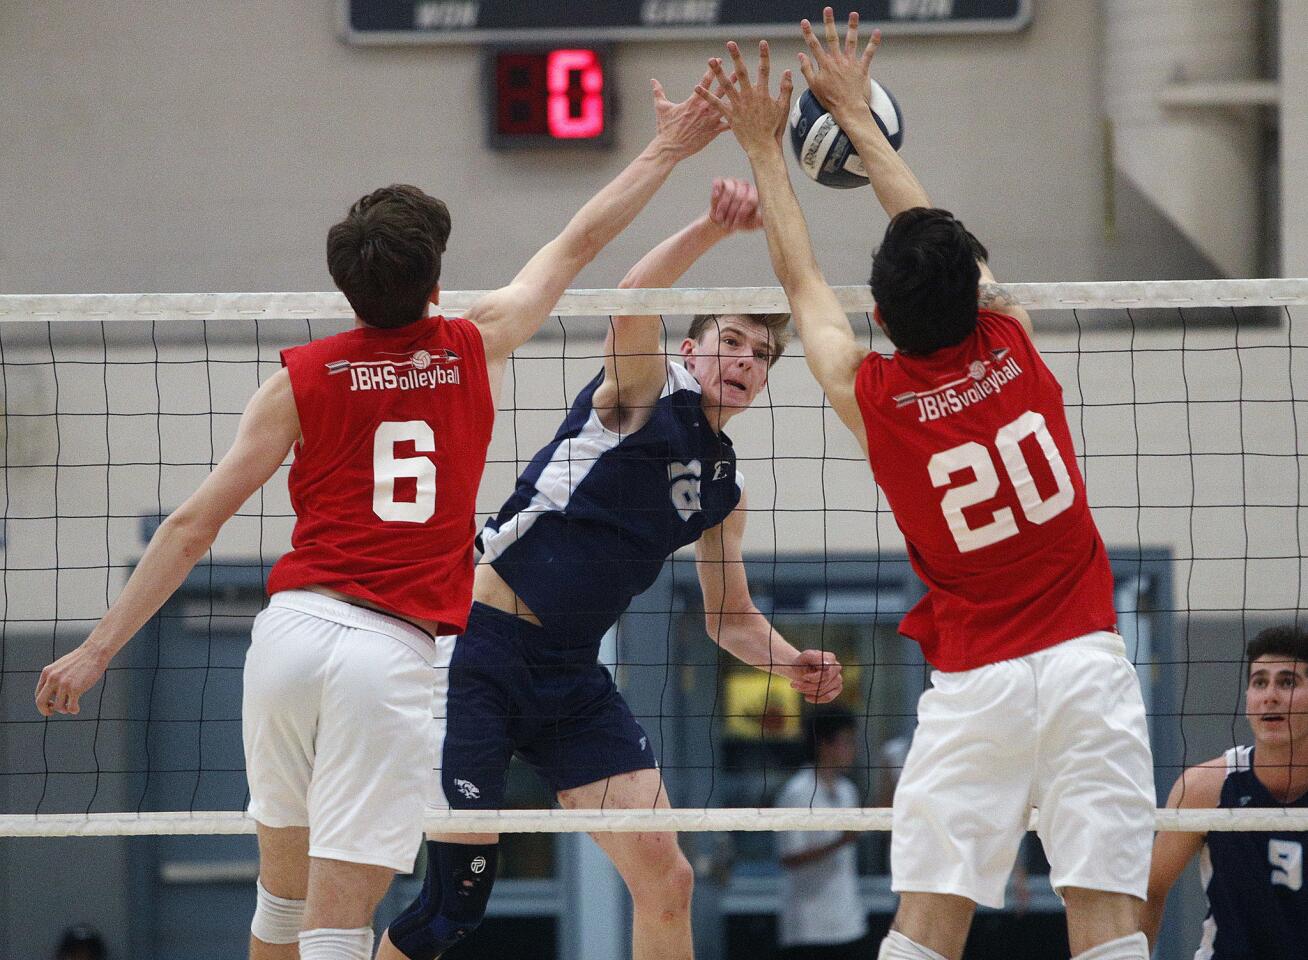 Crescenta Valley's Andrew Boyle hits a kill attempt into the block by Burroughs' Connor Burroughs and Jagger Green in a Pacific League boys' volleyball match at Crescenta Valley High School on Tuesday, April 9, 2019. Burroughs swept the match 3-0.